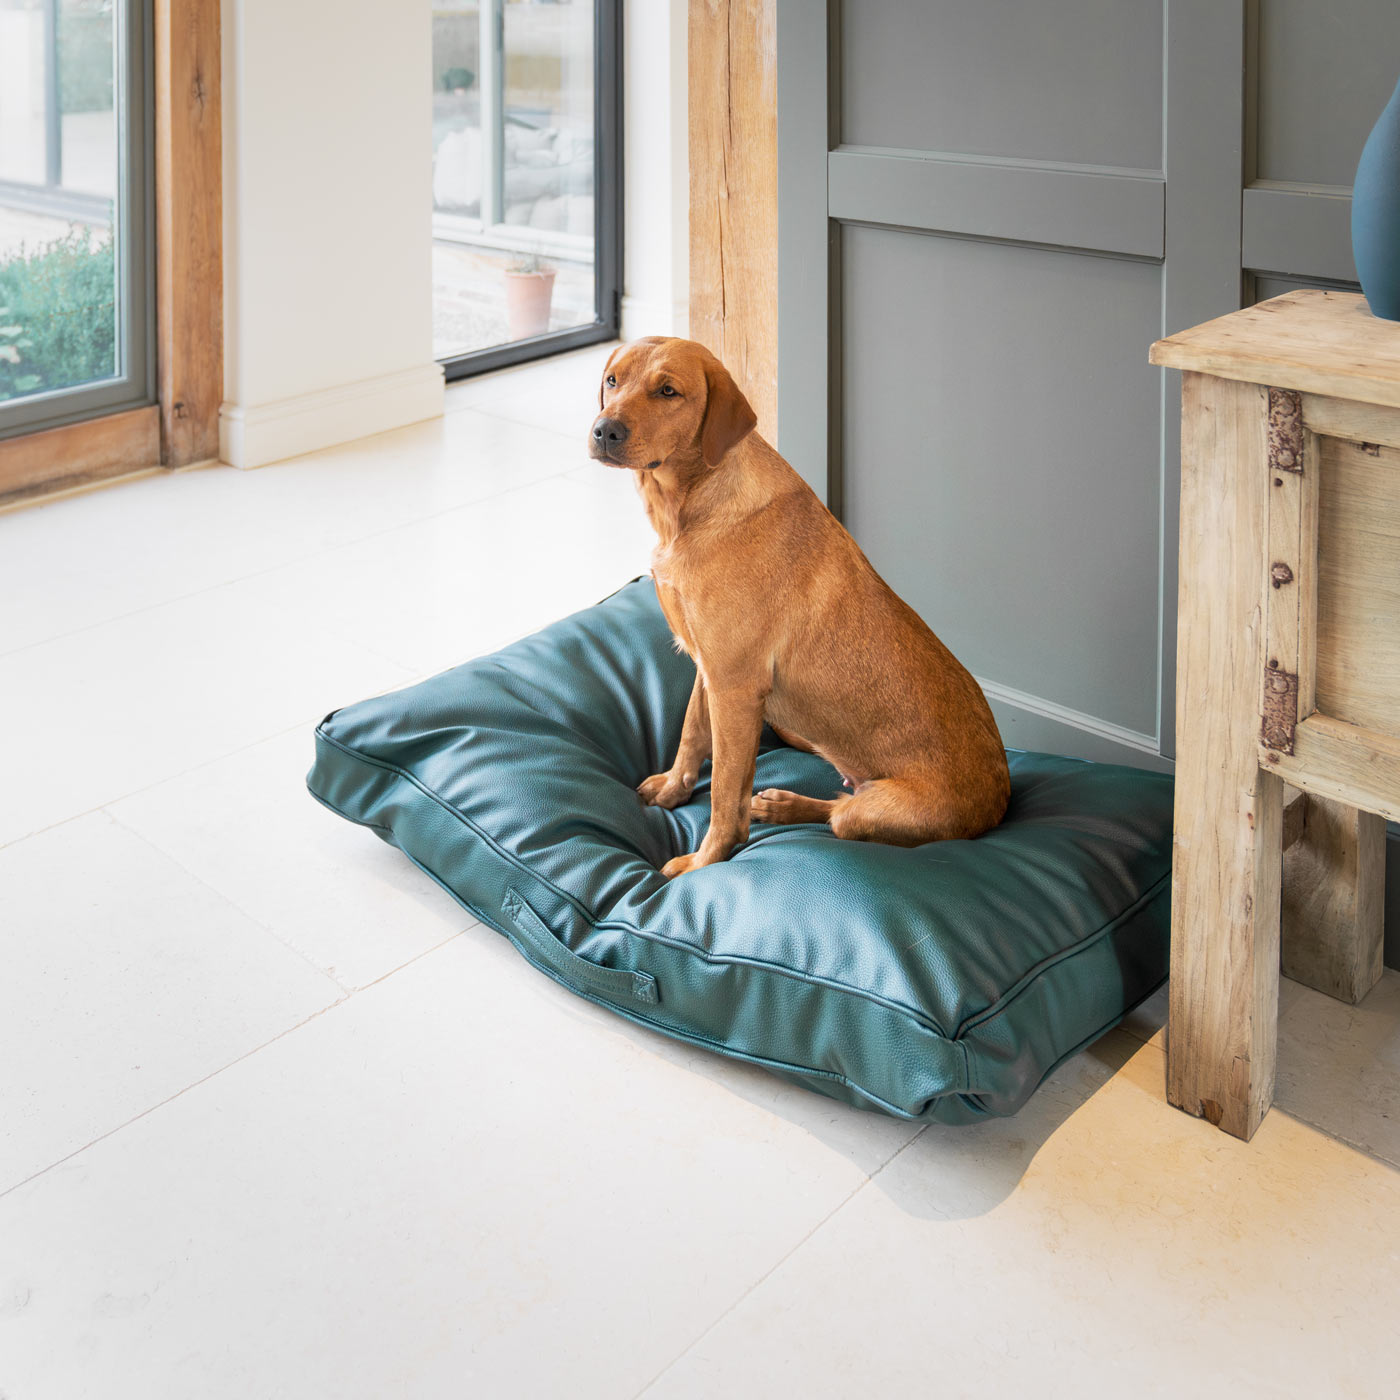 Luxury Dog Cushion in Rhino Tough Forest Faux Leather, The Perfect Pet Bed Time Accessory! Available Now at Lords & Labradors